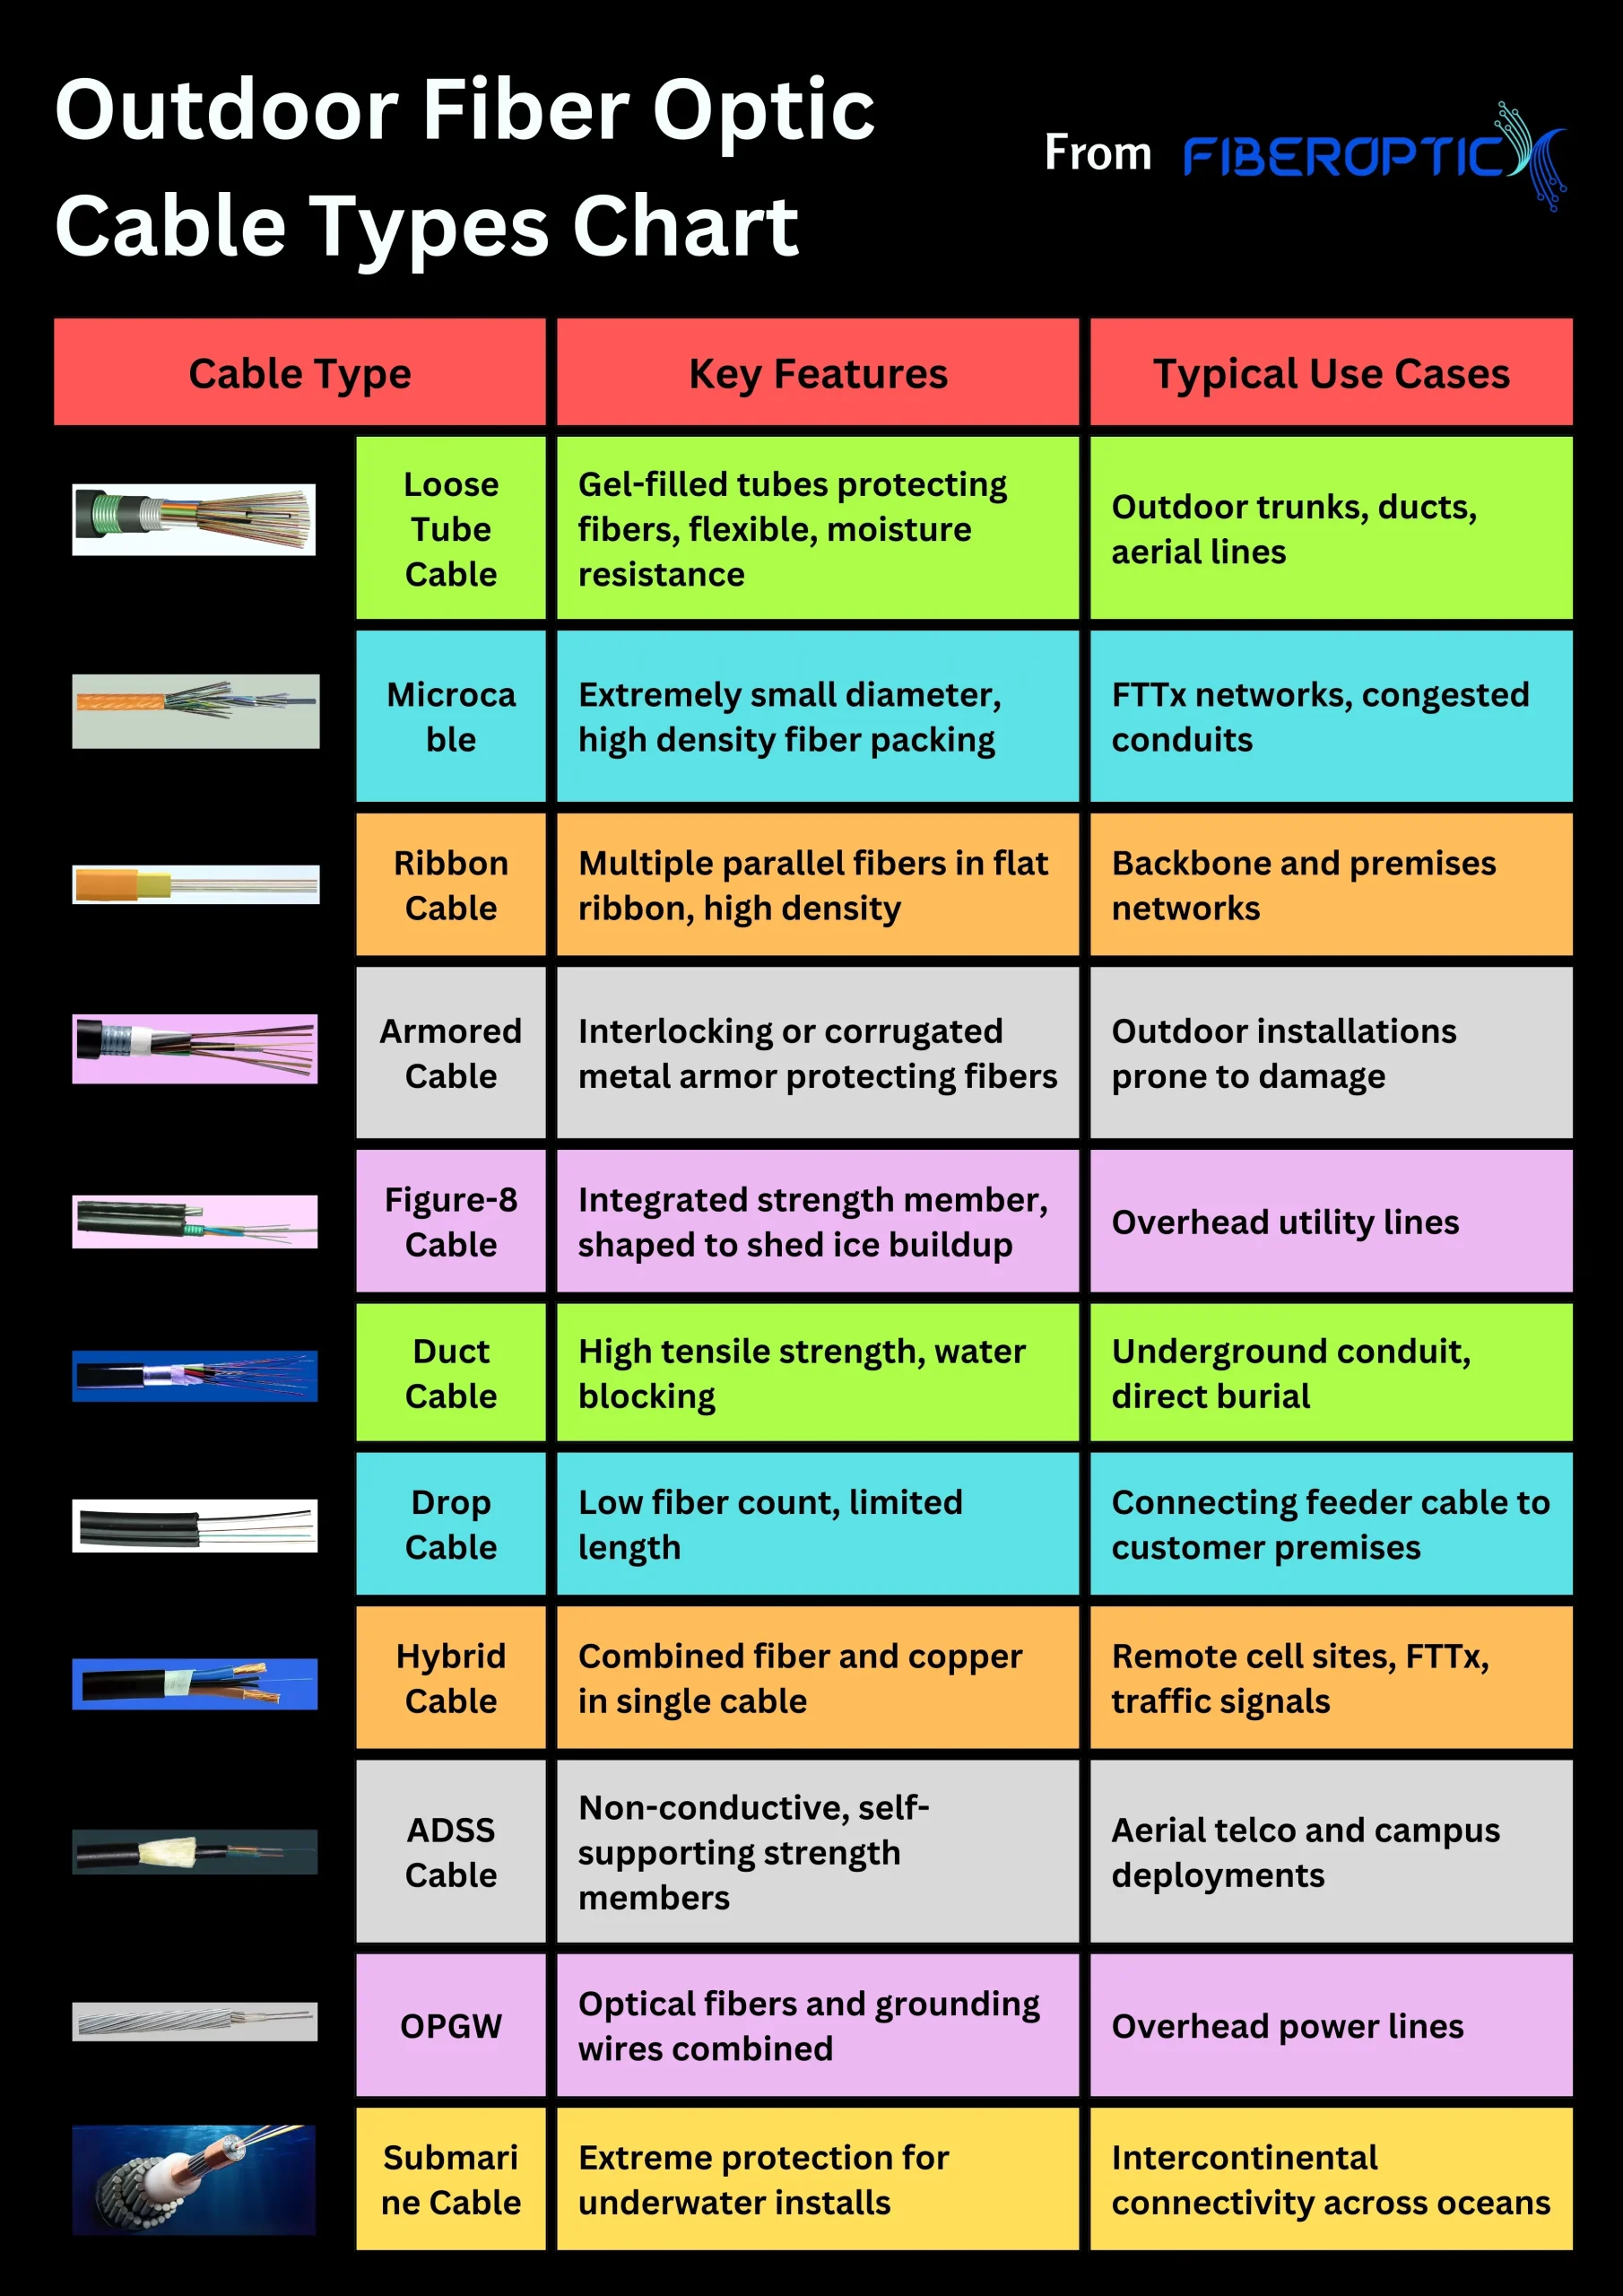 Outdoor fiber optic cable types chart